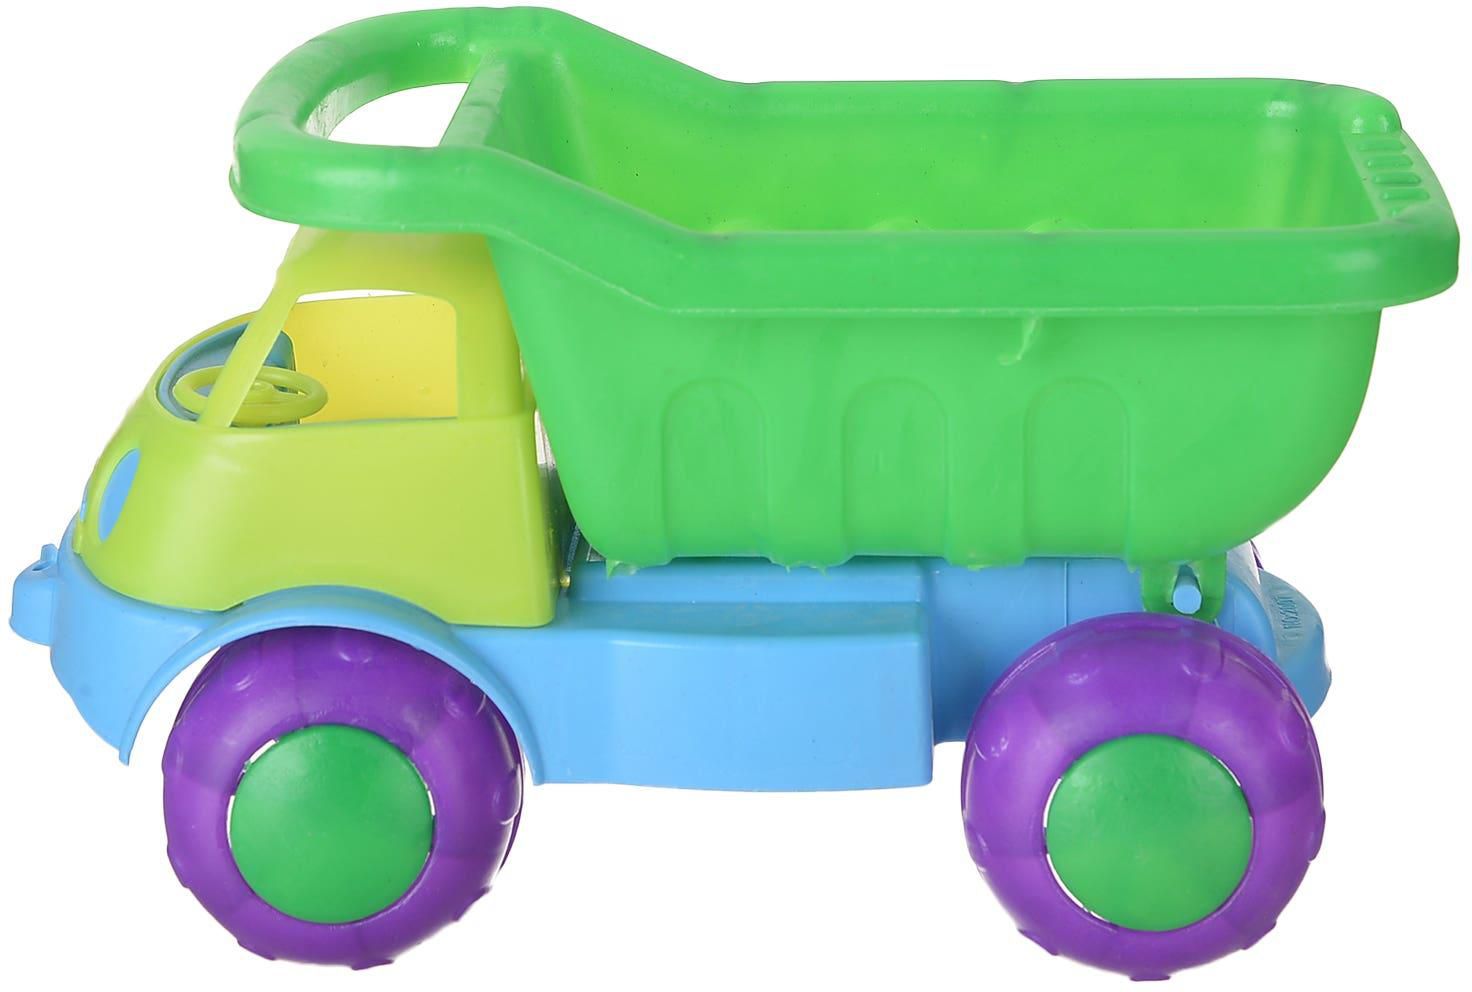 Get Faro Toys car Toy, 20×14 cm - Multicolor with best offers | Raneen.com